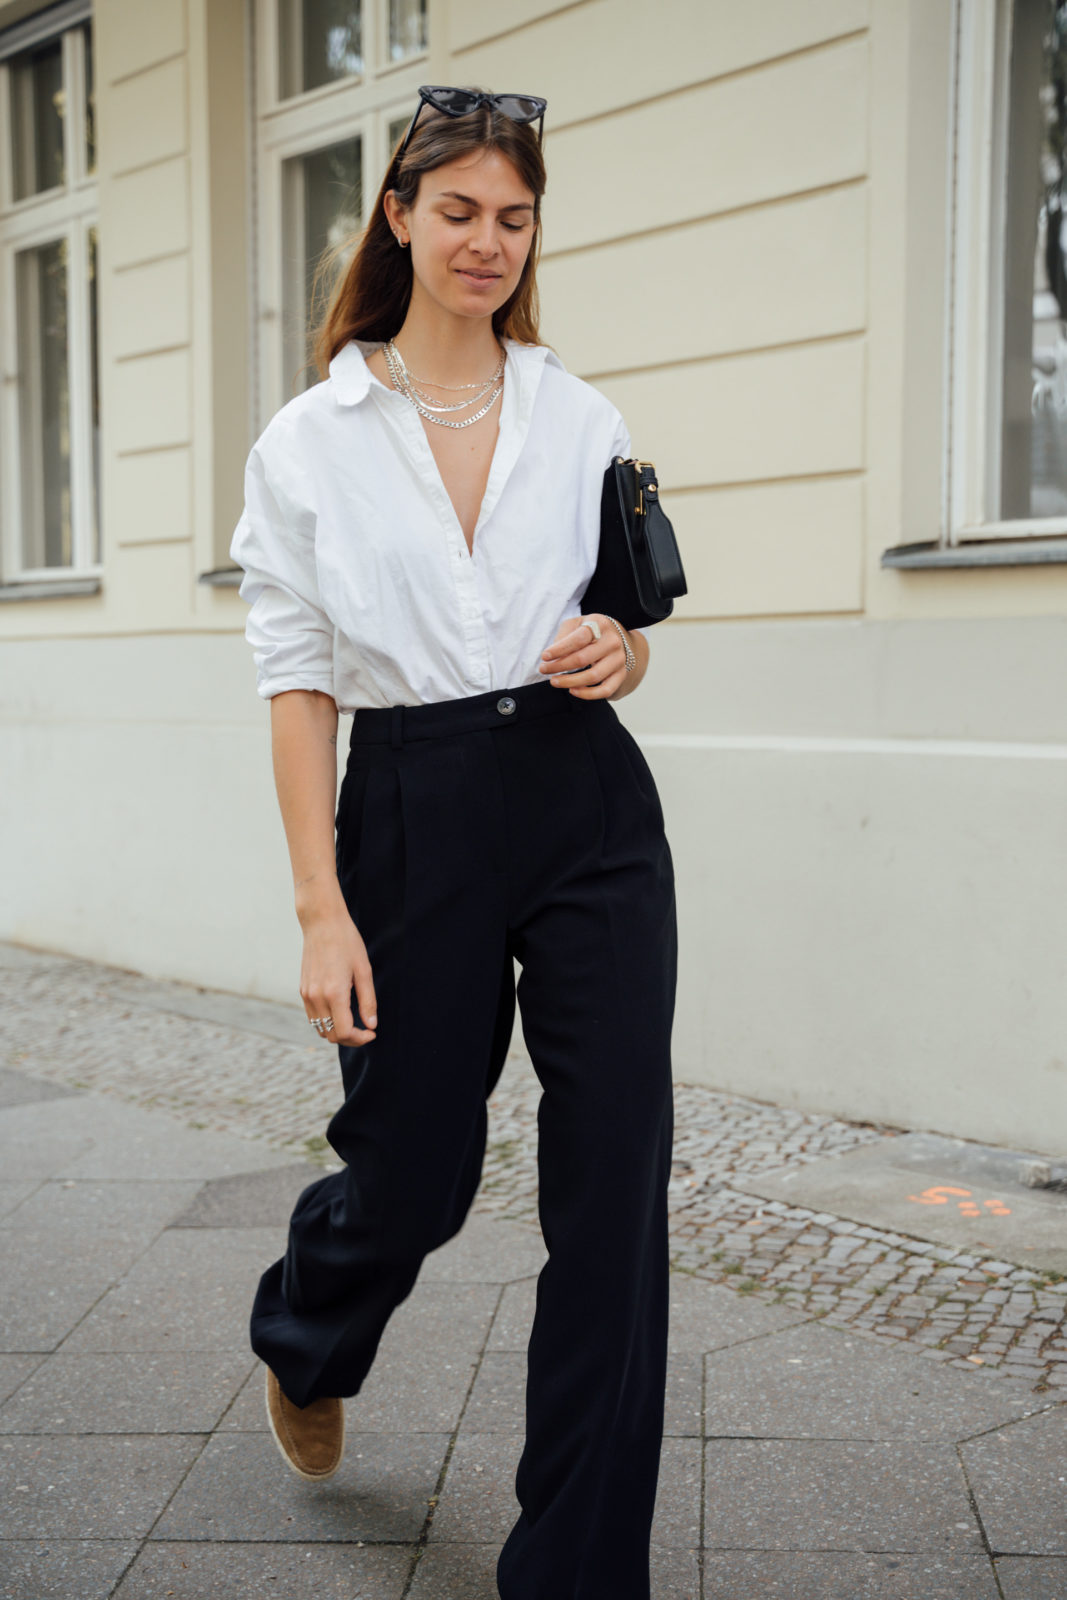 Loafer Outfit Shoe Trend 2020 - how to combine Loafer